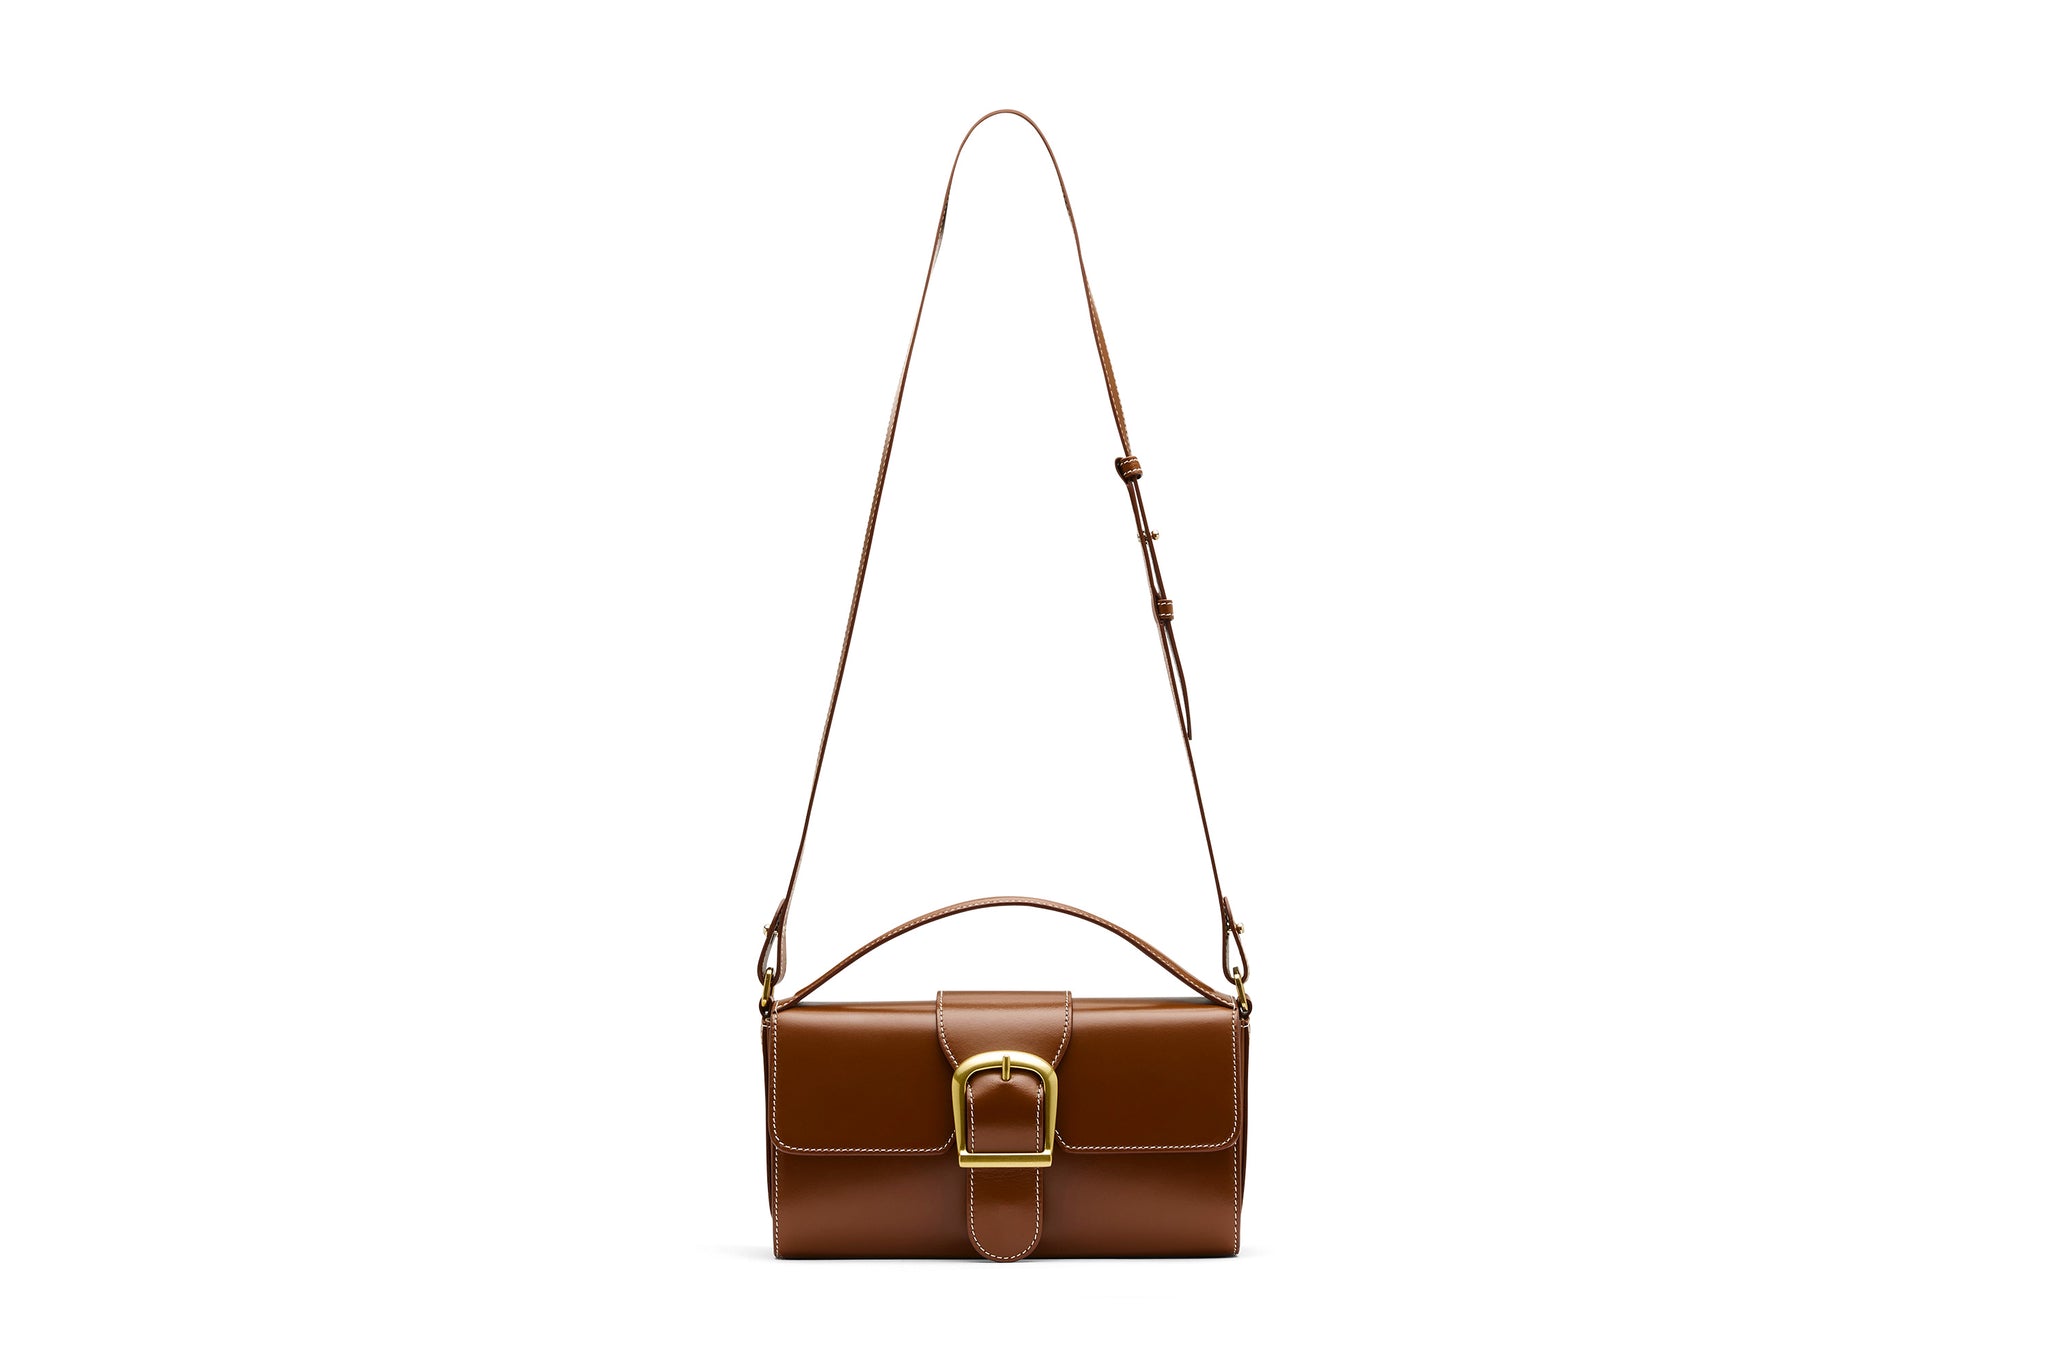 11_48 Cognac with Ivory Stitch Small Satchel with Flat Handle, Made in Italy, Rylan, Rylan Studio